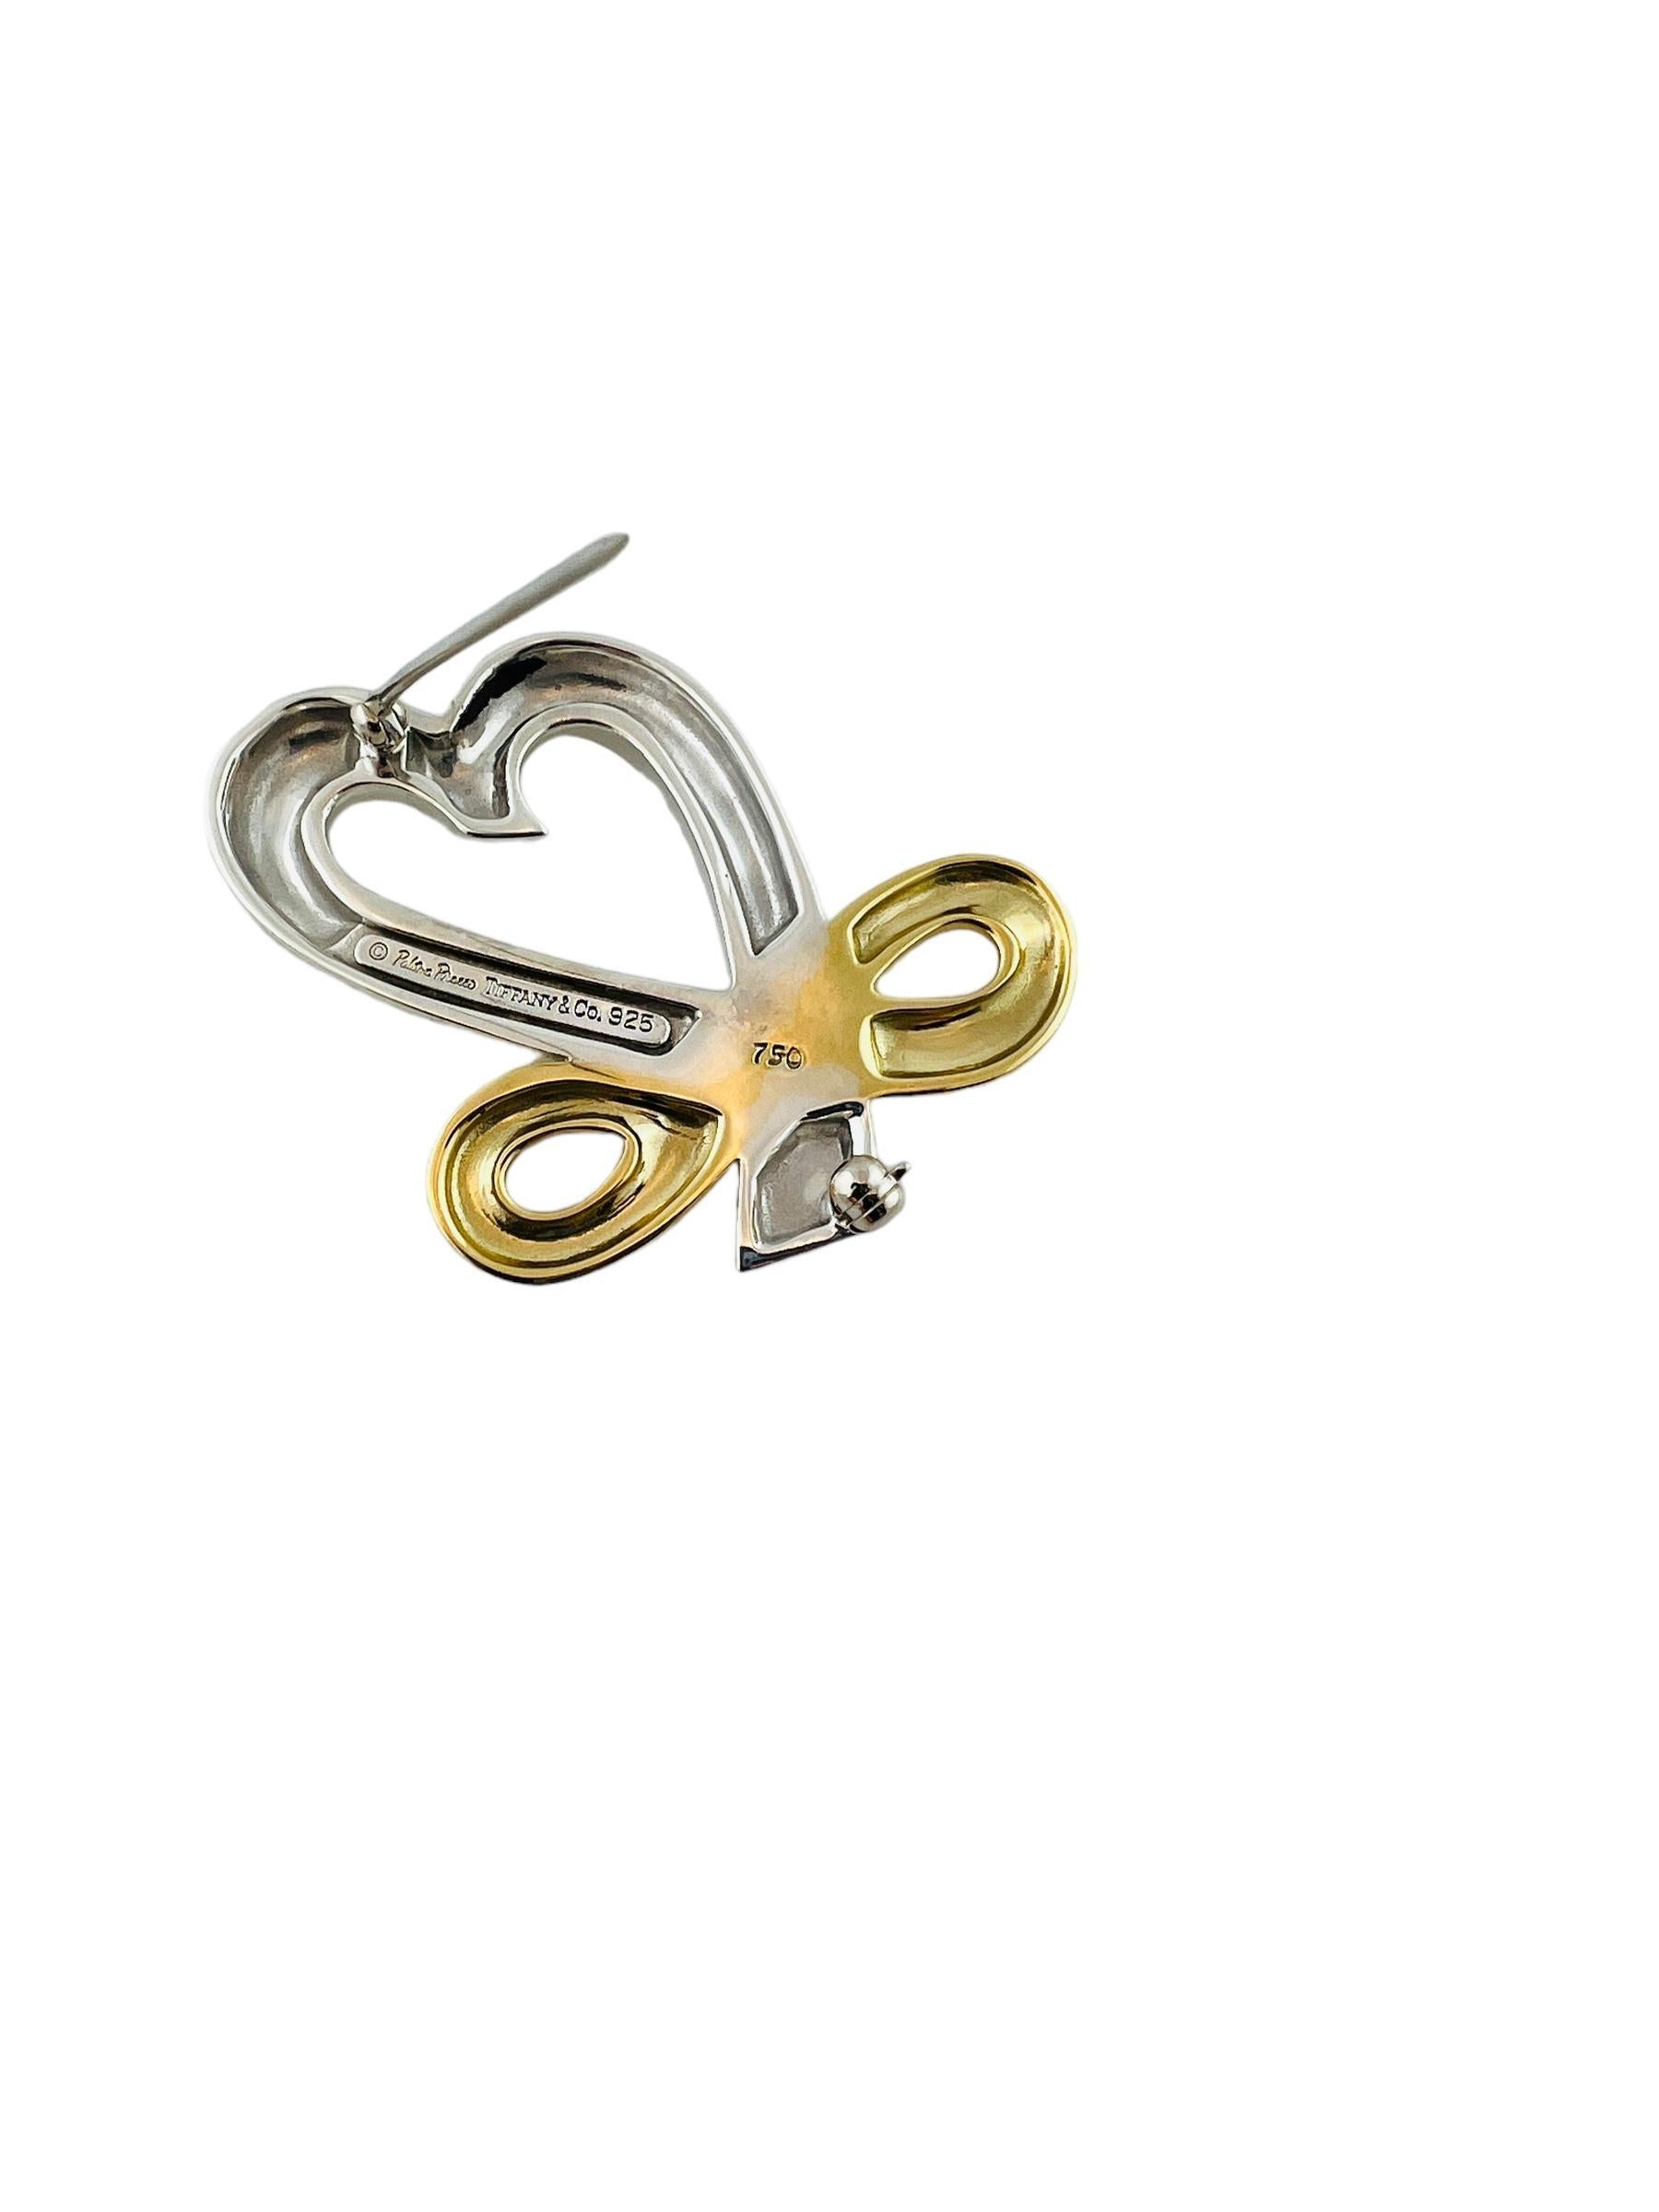 Tiffany & Co. Picasso 18K Gold Sterling Open Heart Infinity Brooch #15427 For Sale 2